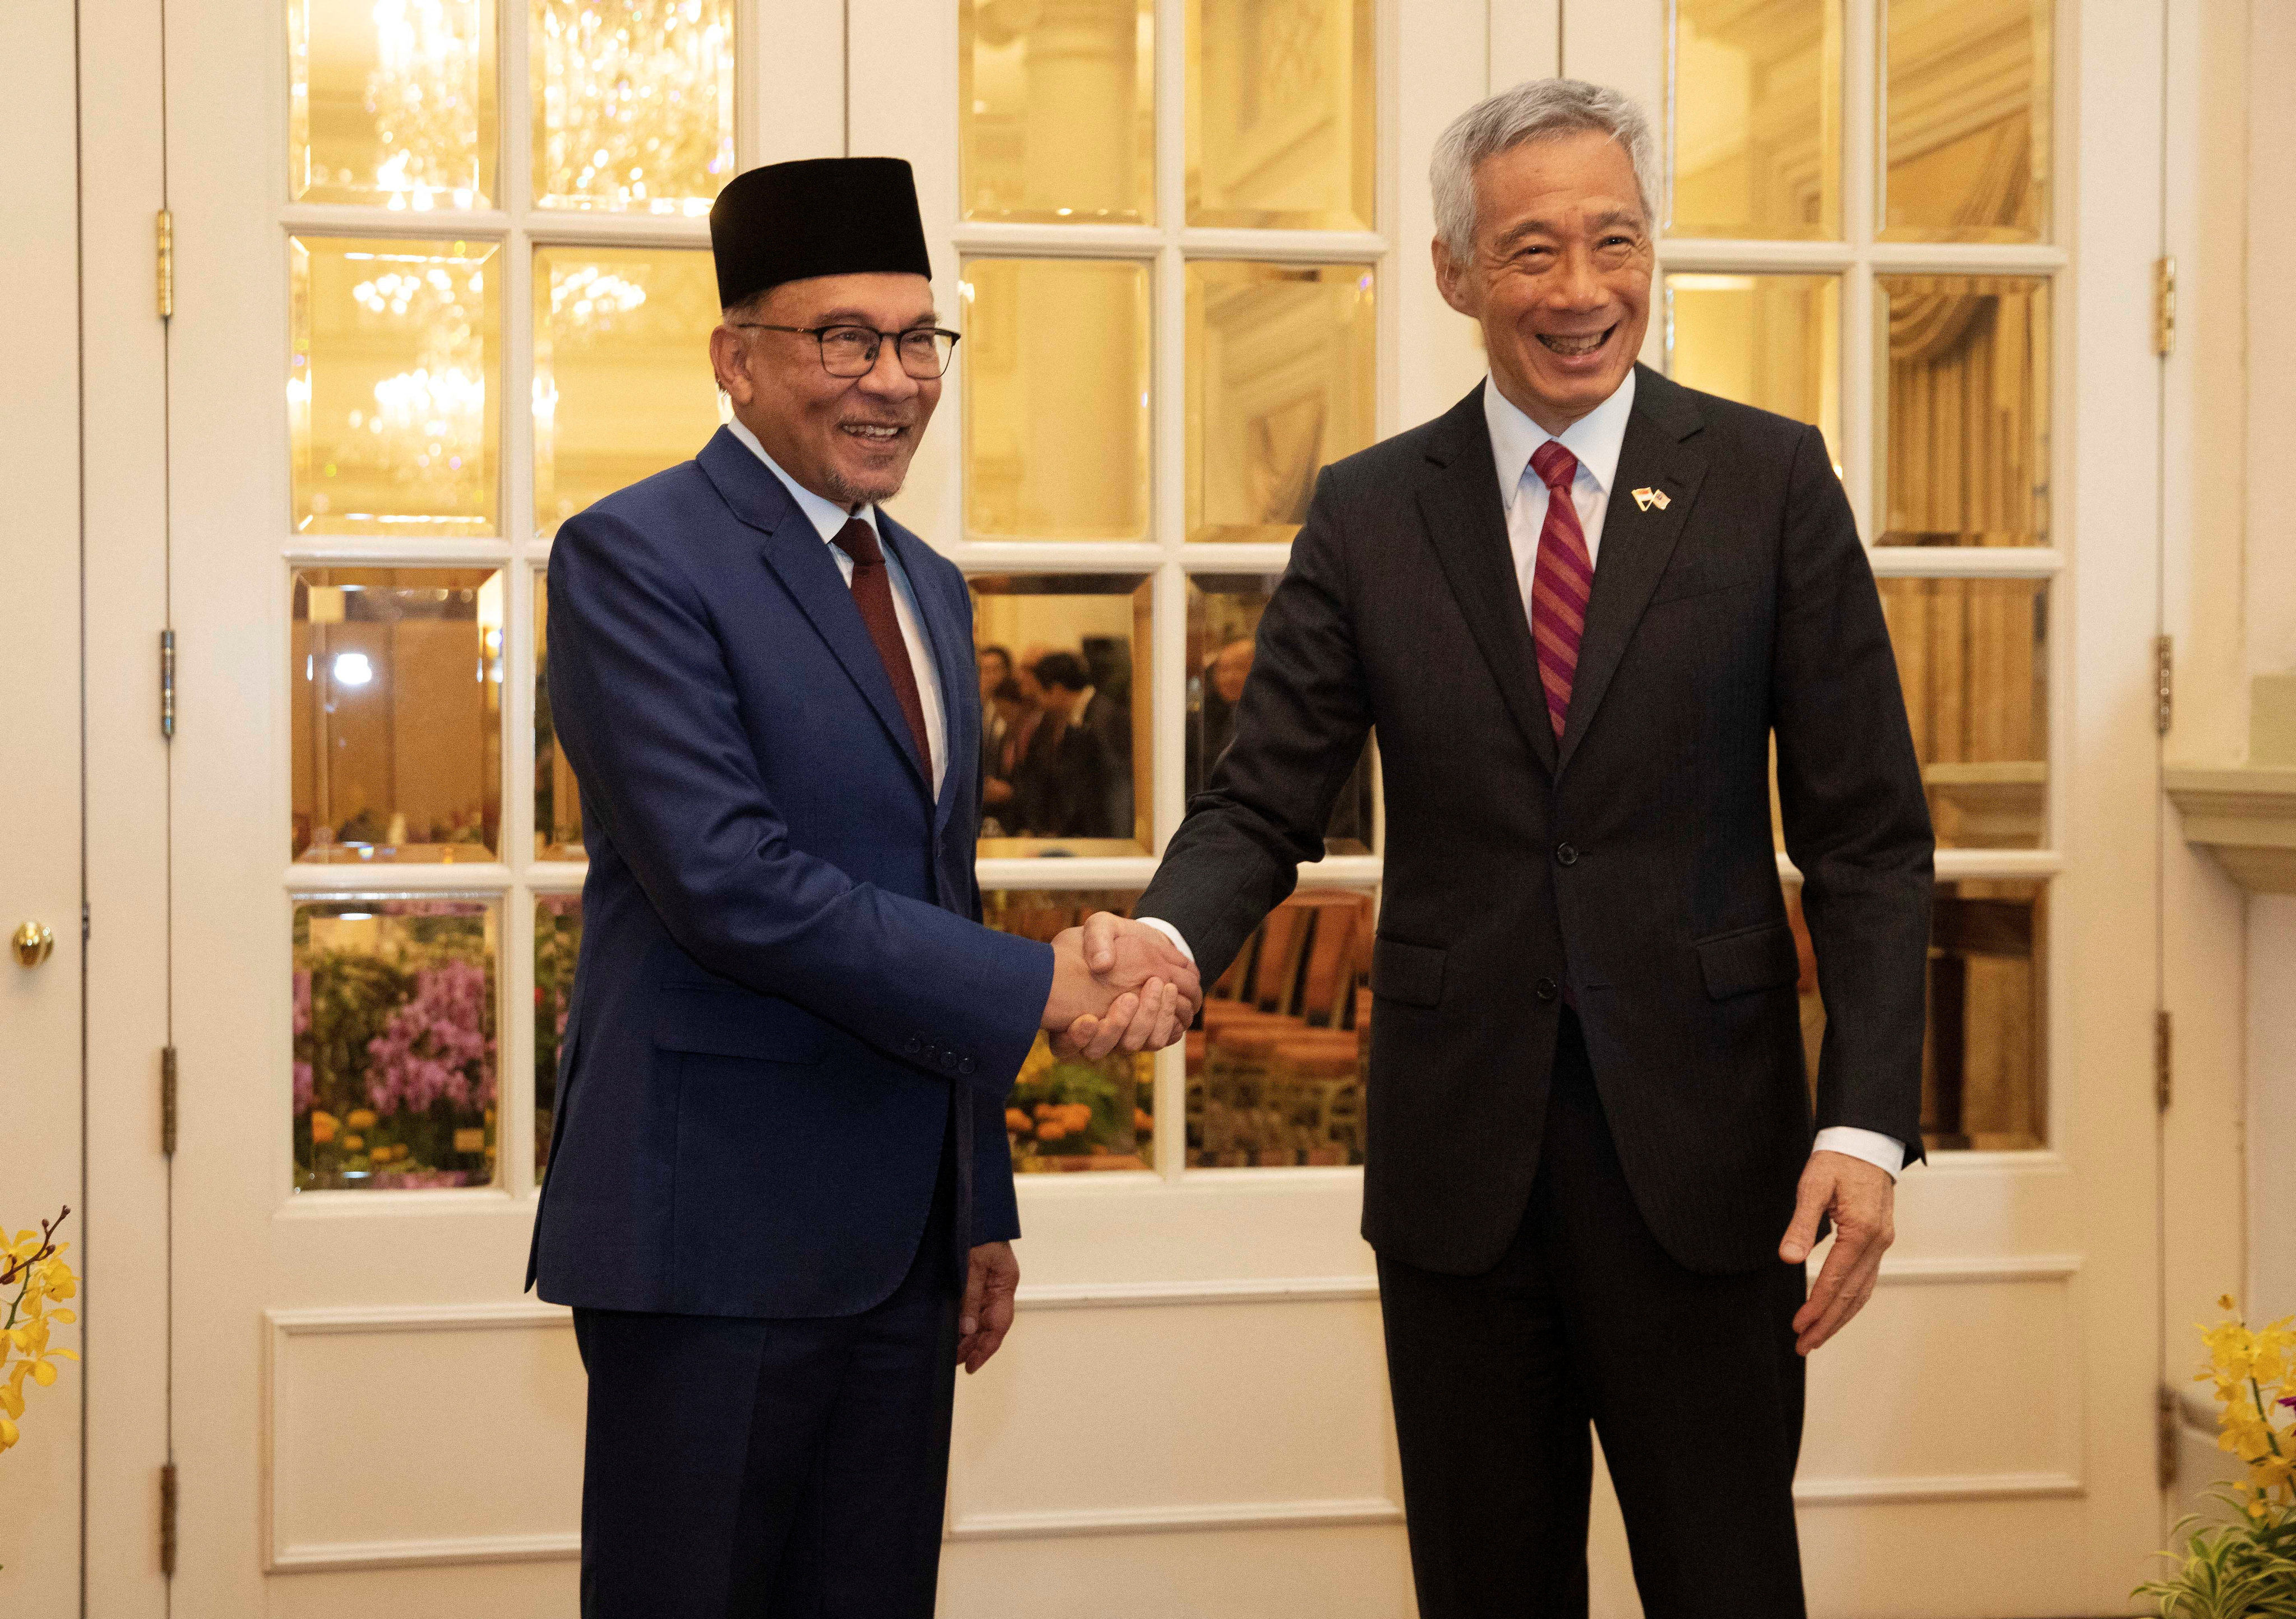 Malaysian Prime Minister Anwar Ibrahim and his Singapore counterpart Lee Hsien Loong at the Istana on Monday. Photo: Pool via Reuters